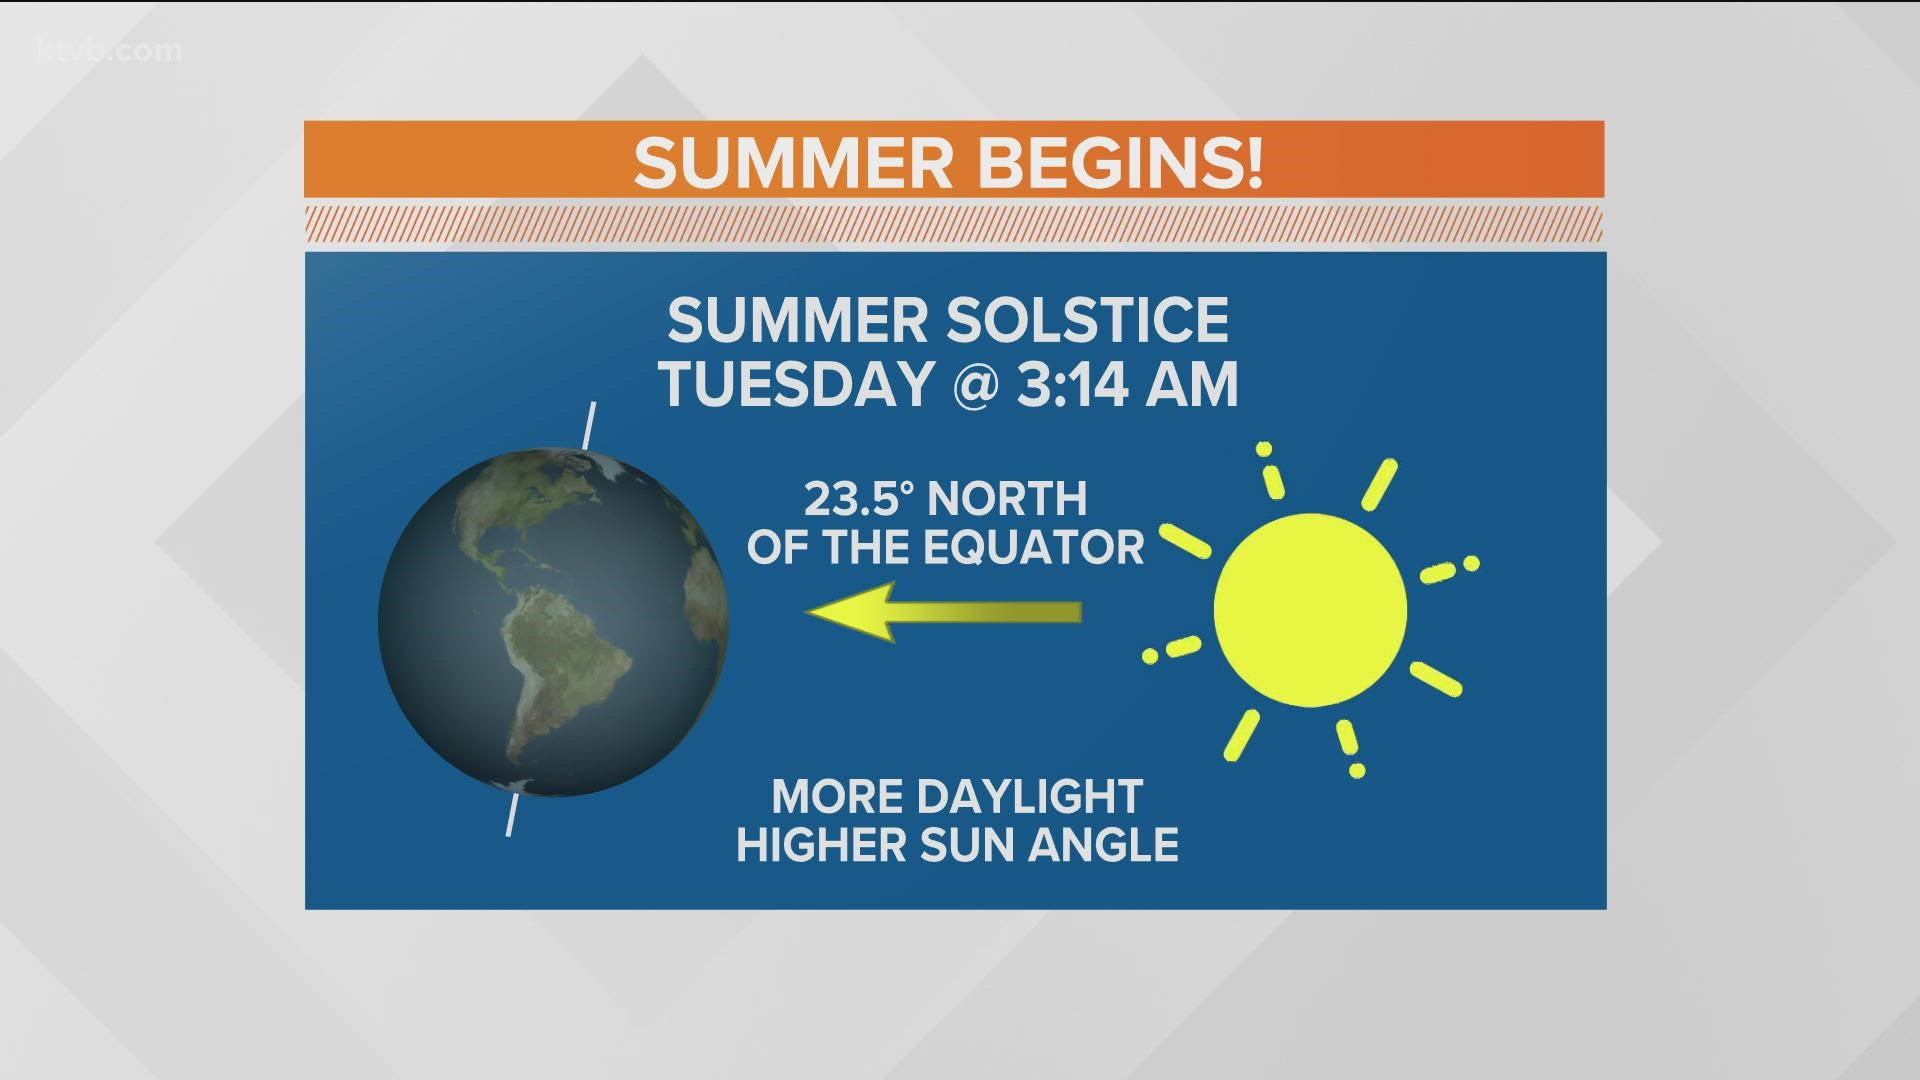 Tuesday, June 21 is the summer solstice, longest day of the year, with 15 hours and 26 minutes of daylight.